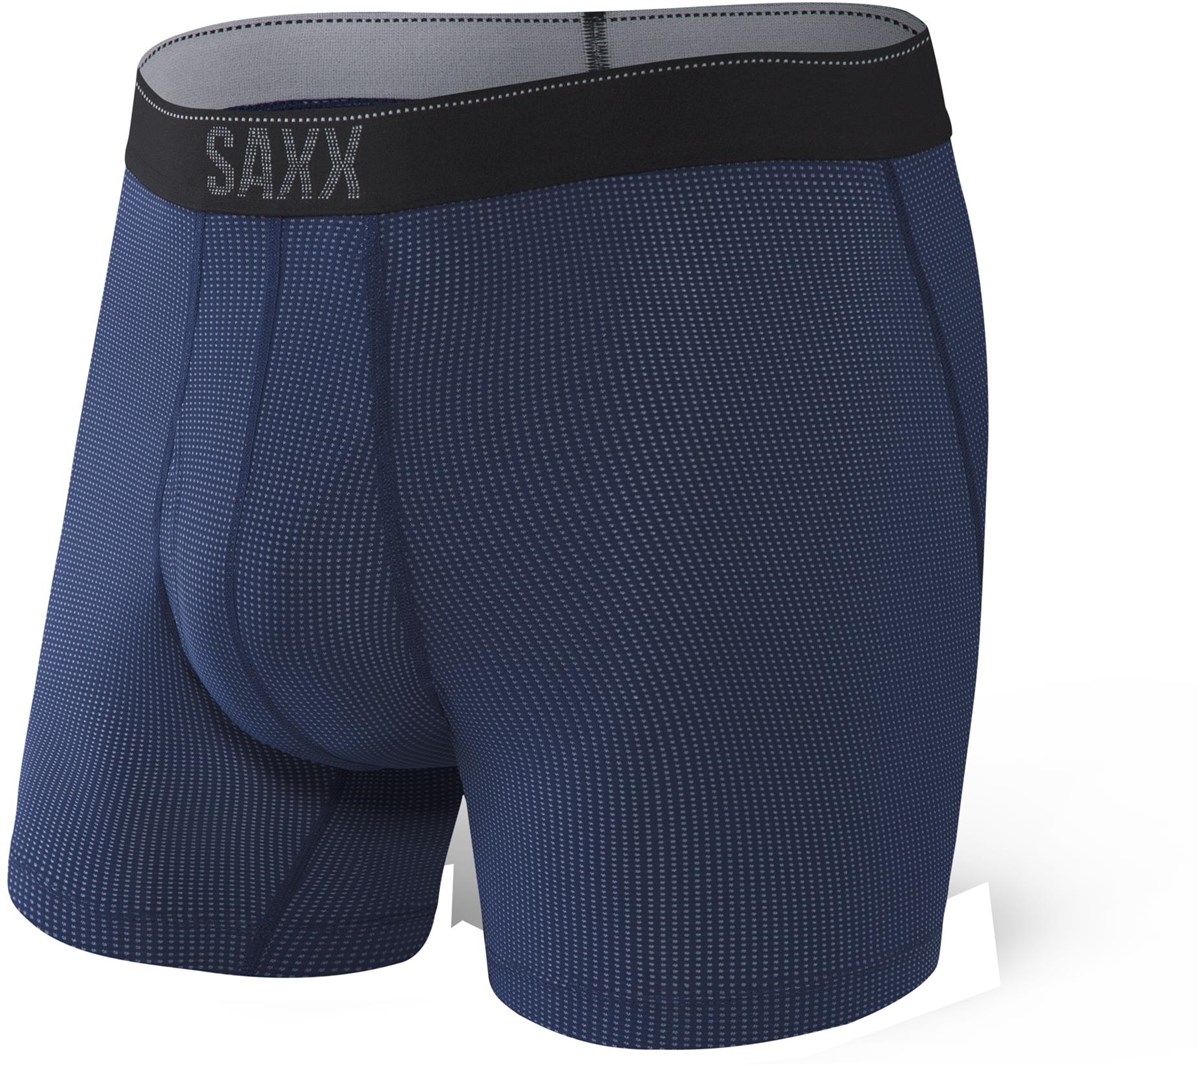 SAXX Underwear Quest Fly Boxer Brief product image